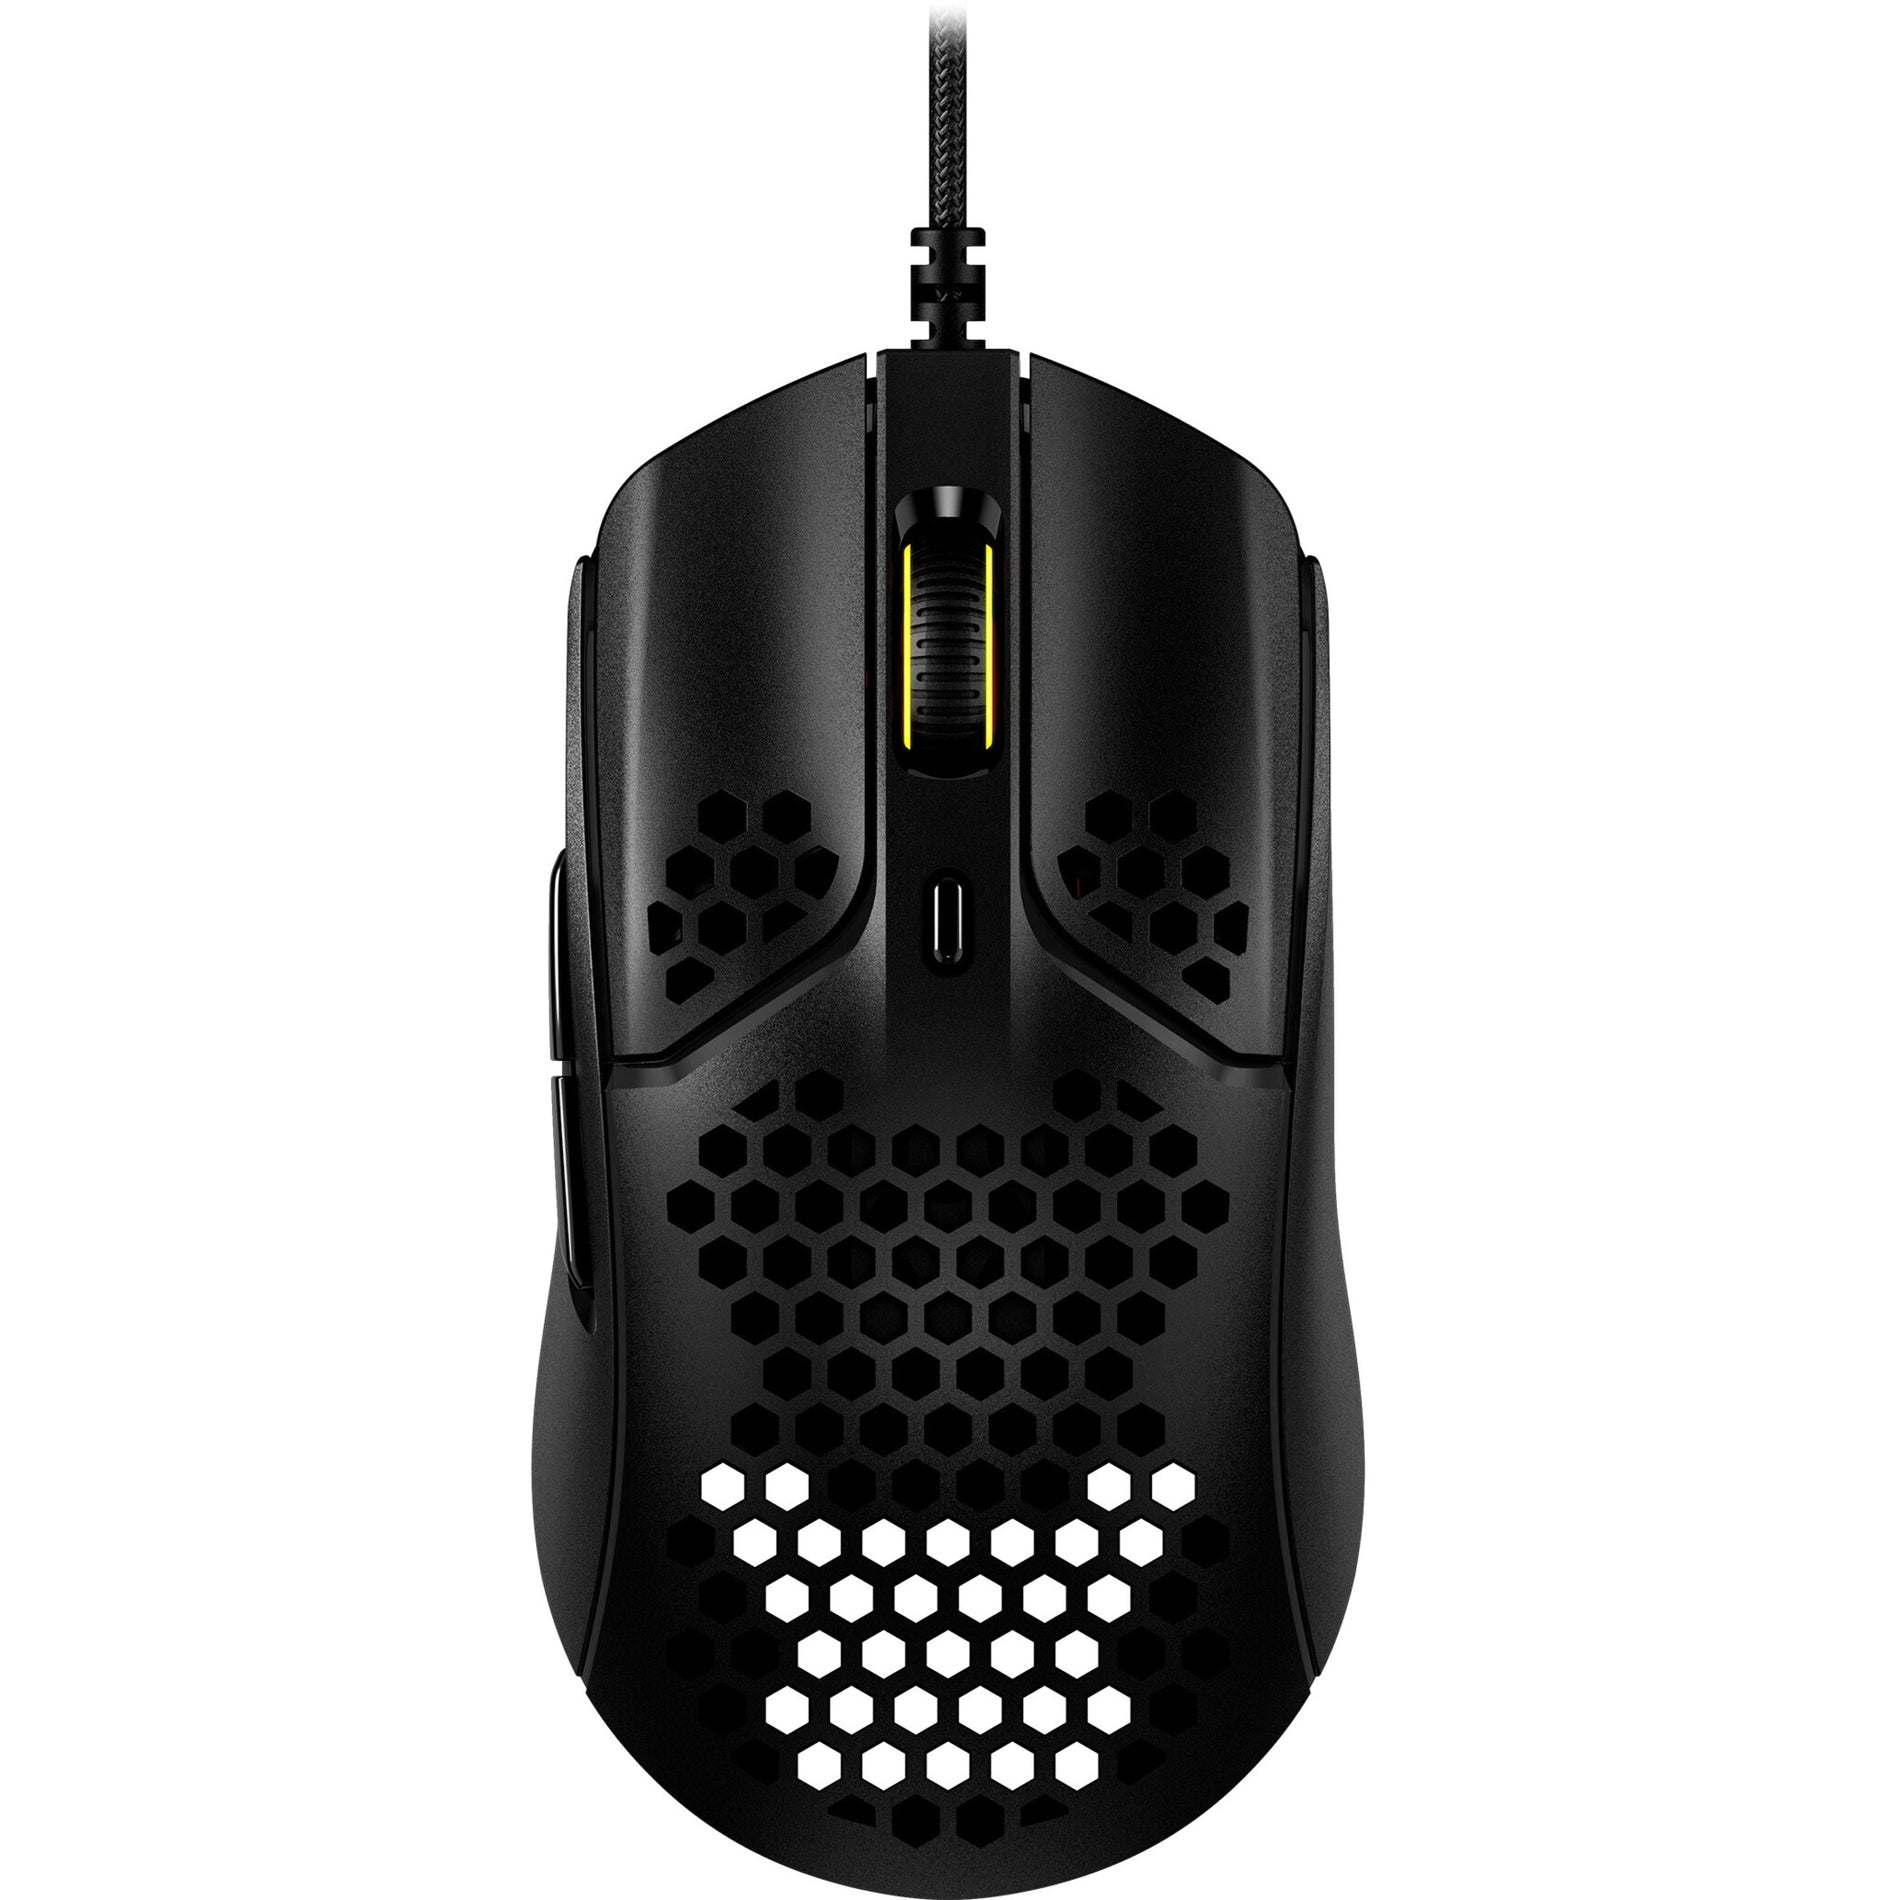 HyperX 4P5P9AA Pulsefire Haste Gaming Mouse, Lightweight and Precise for Enhanced Gaming Performance